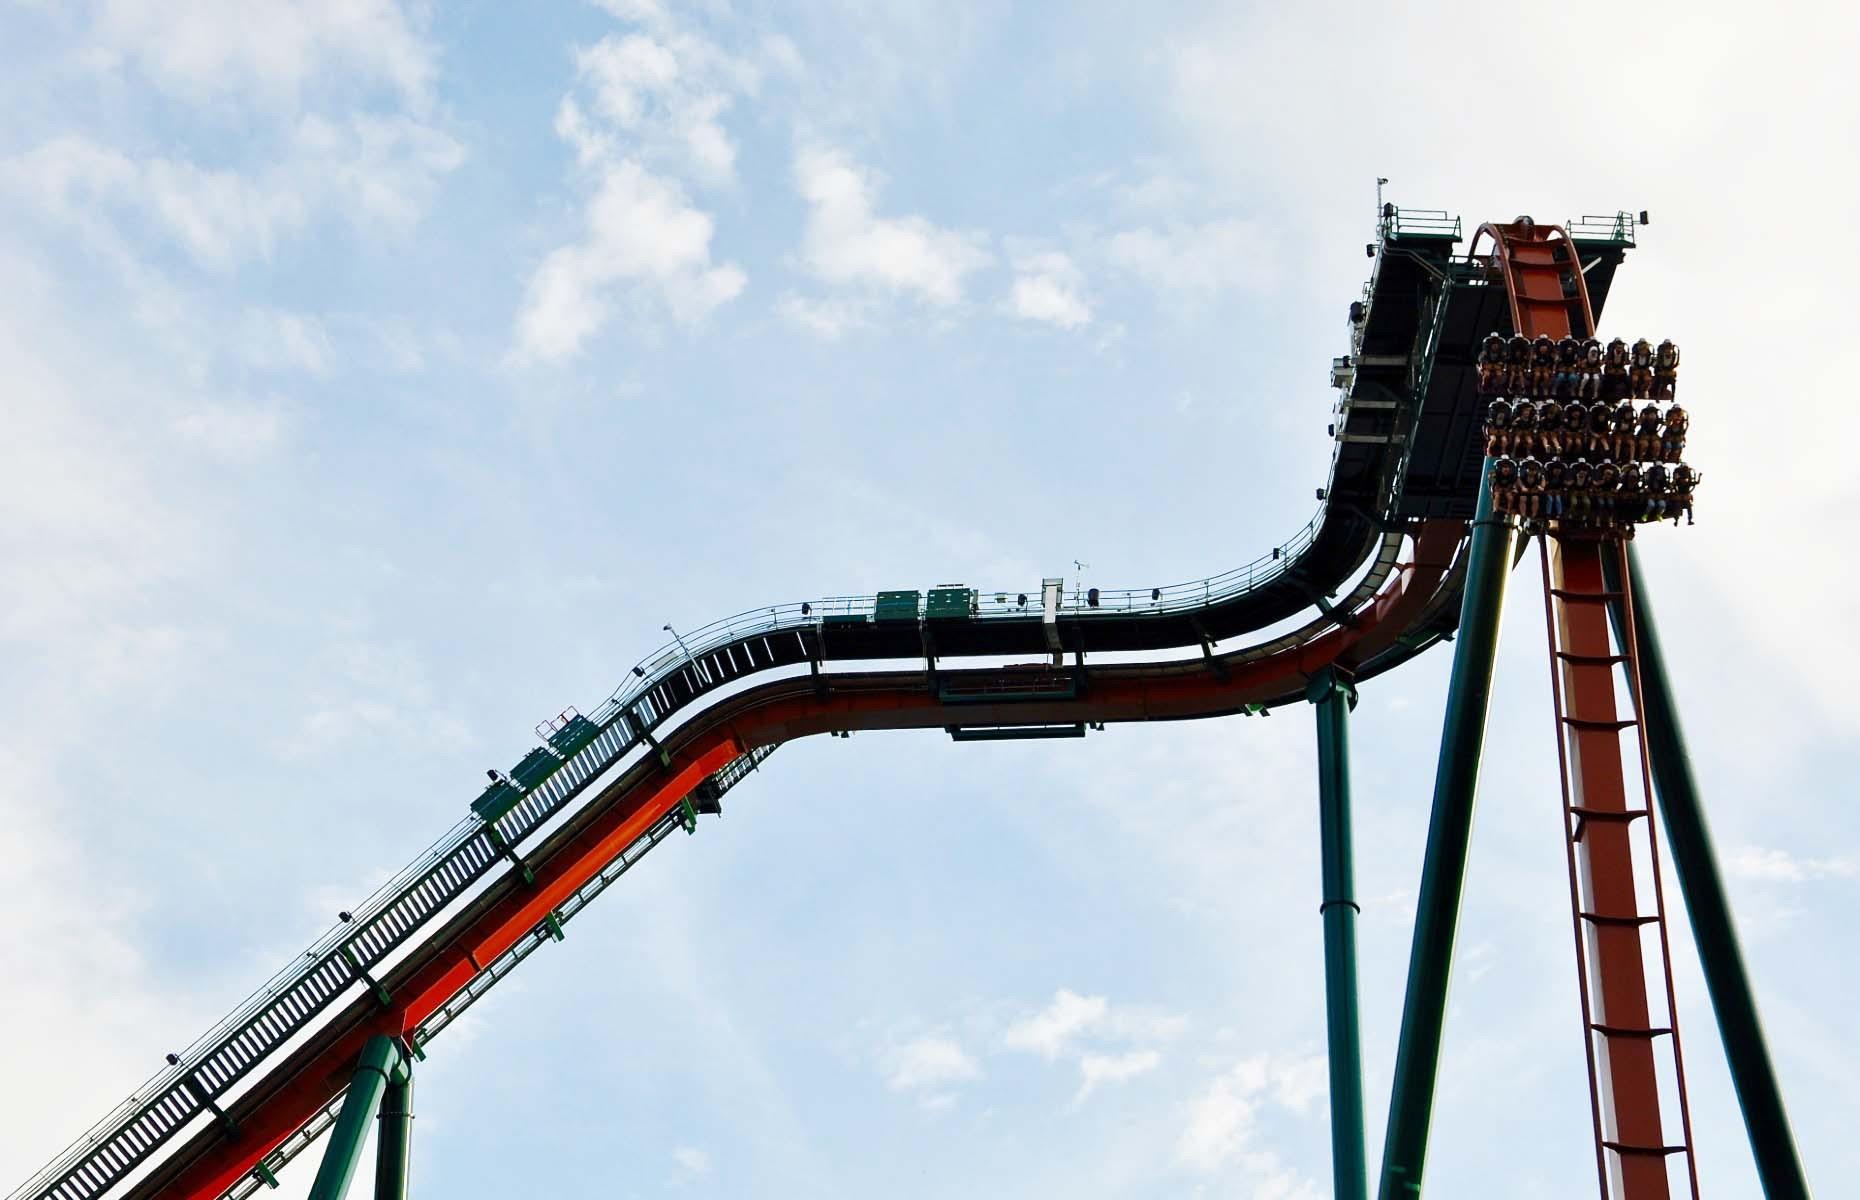 <p>Speaking of Yukon Striker, this incredible dive coaster is the star attraction at Canada's Wonderland. Reaching heights of 245 feet, speeds of 80 miles per hour, and boasting a track length of 3,625 feet, Yukon Striker is not for the faint-hearted.</p>  <p>The best bit? Hanging over a 90° drop for three seconds before darting into an underwater tunnel. A complete 360° loop also awaits – the only one of its kind for a dive coaster.</p>